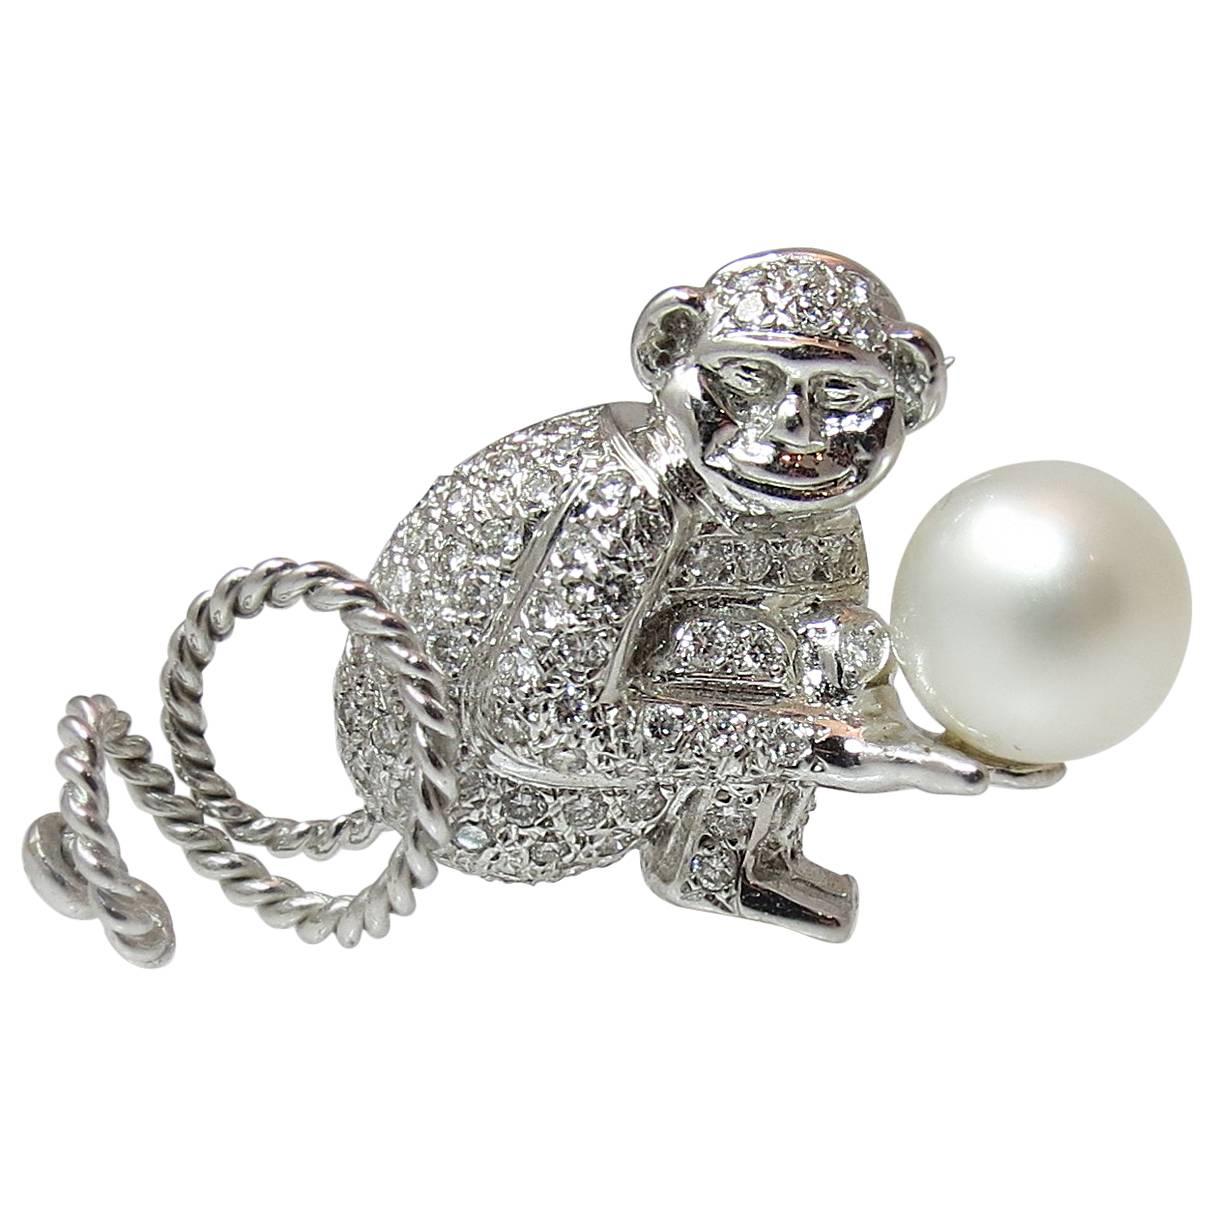 Adorable 18K White Gold Diamond and South Sea Pearl Monkey Pin For Sale